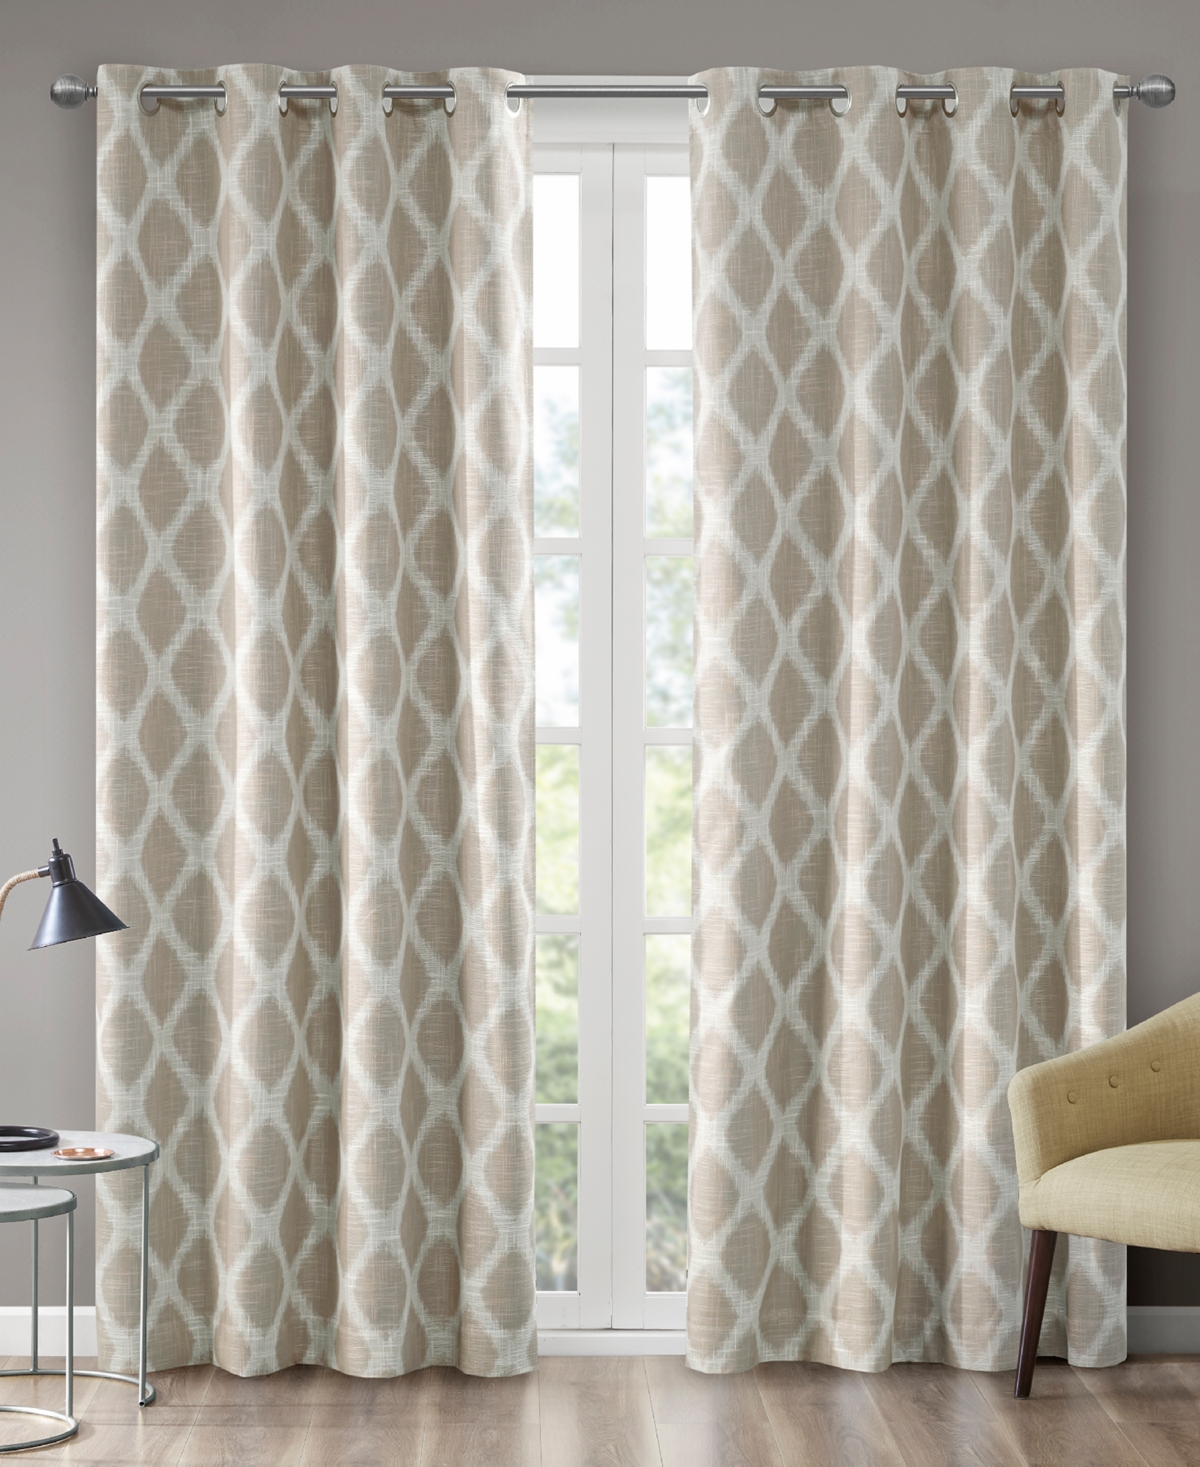 Blakesly Ikat Blackout Curtain Panel, 50"W x 95"L - Taupe